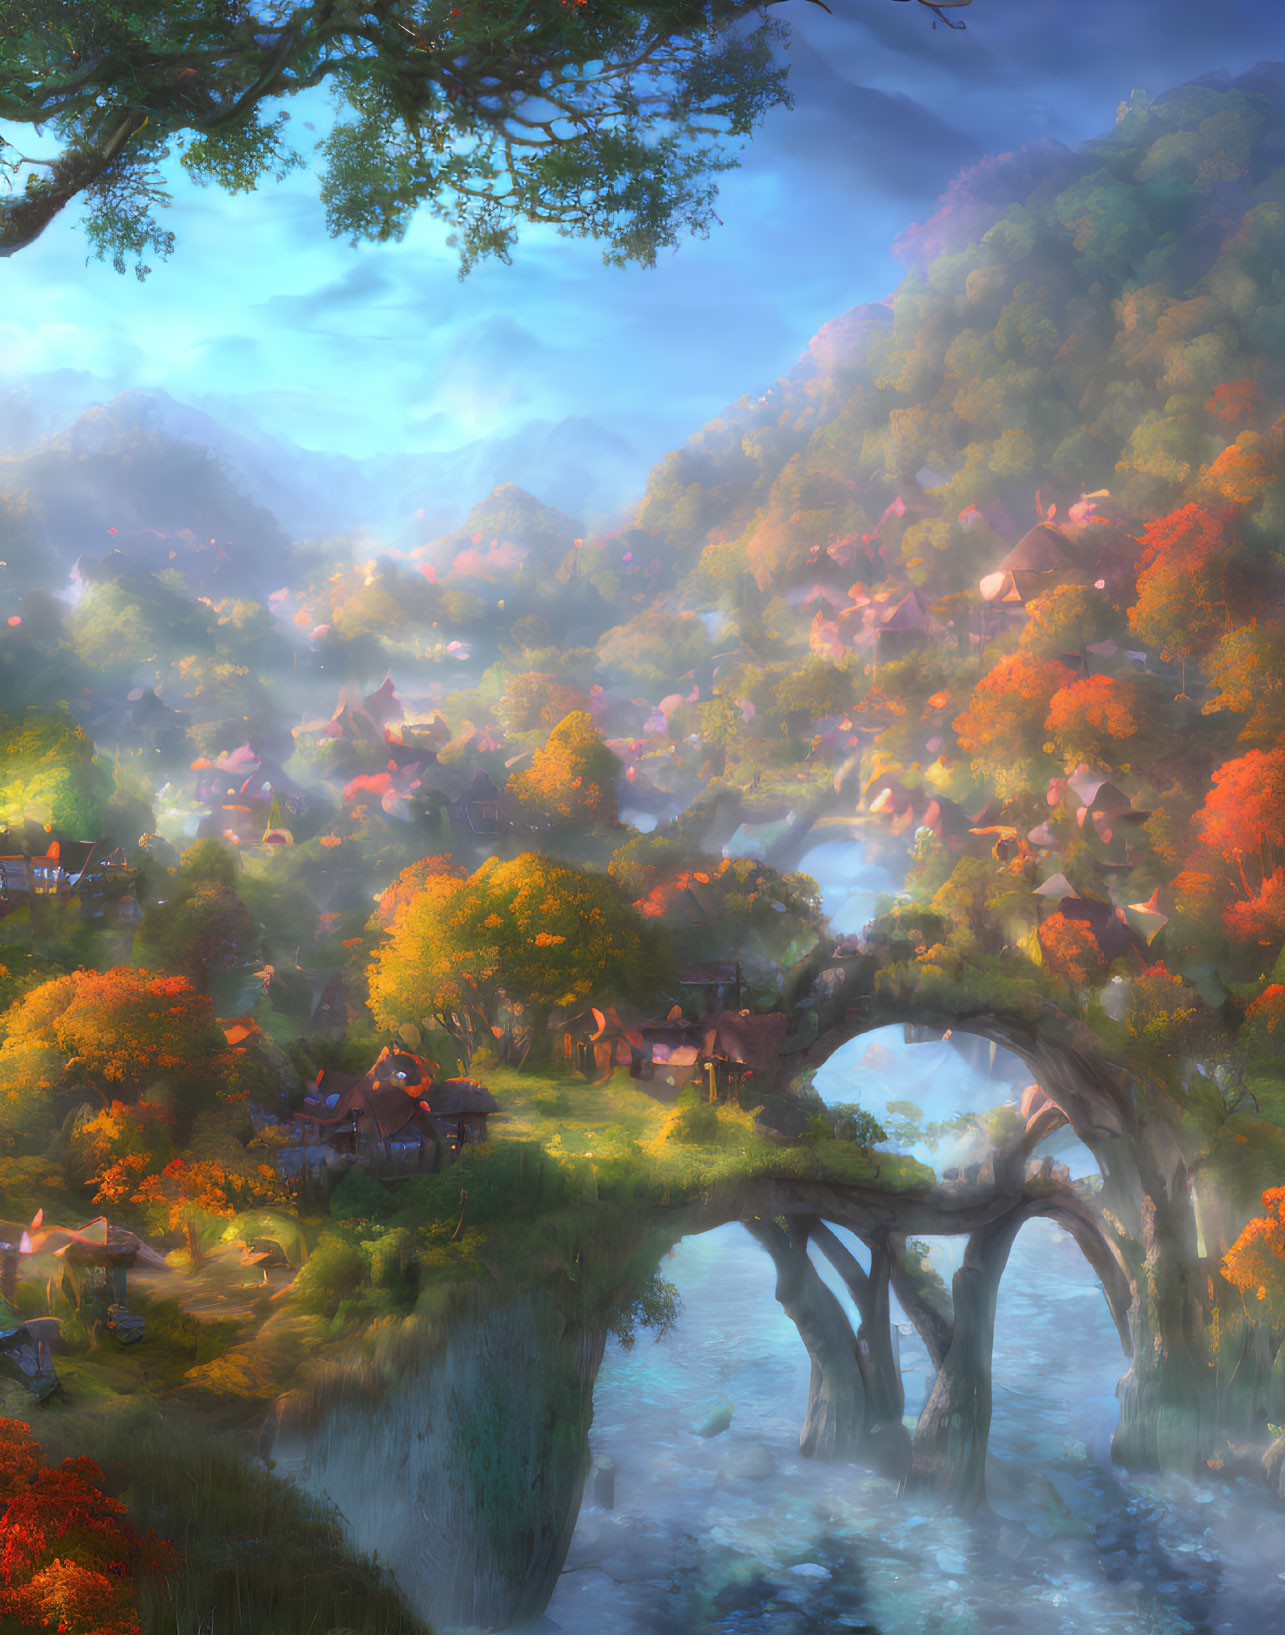 Autumn Village with Quaint Houses and Misty Mountains